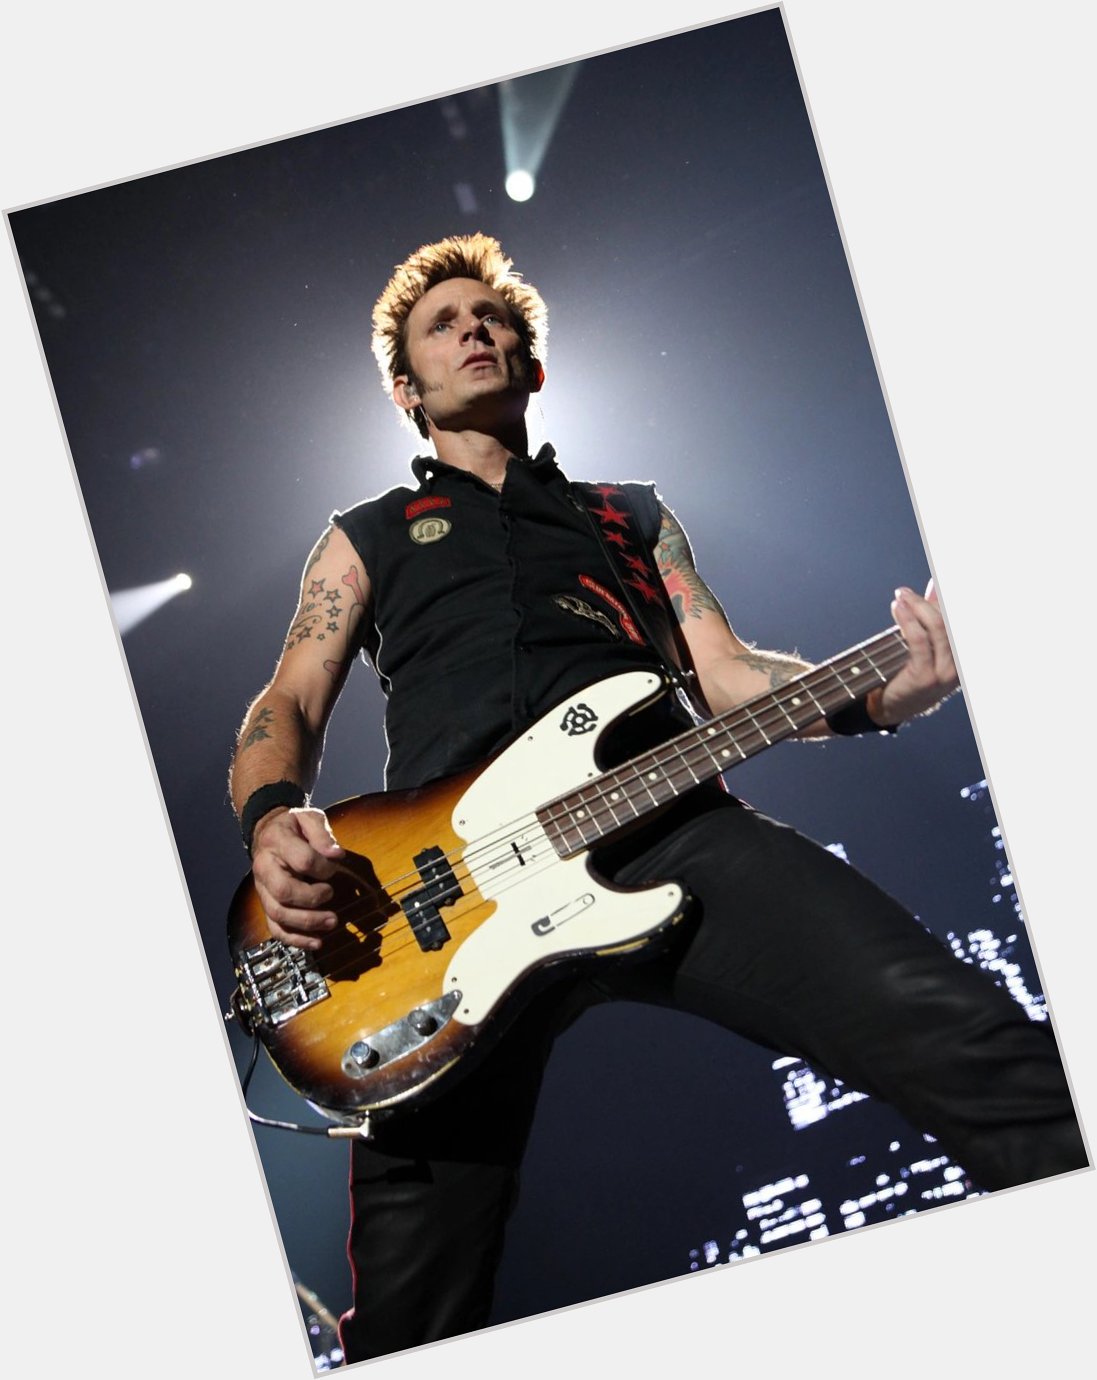 Happy Birthday to Mike Dirnt! May the 4th be with you, always! 